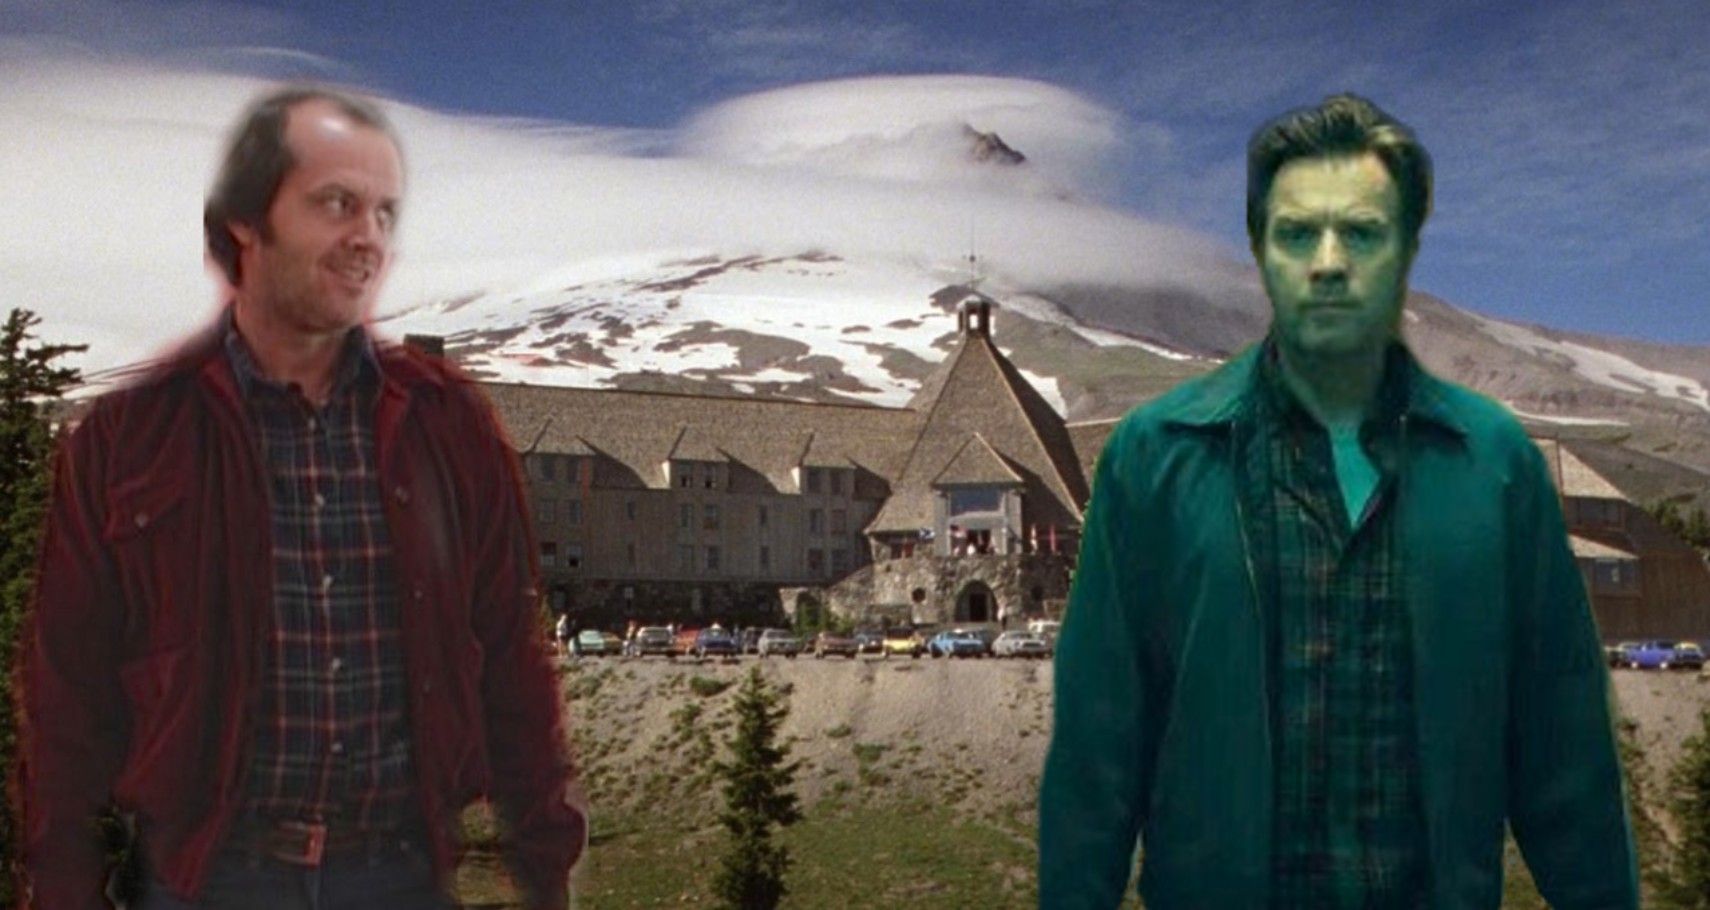 10 Hidden Details About The Overlook Hotel Everyone Missed